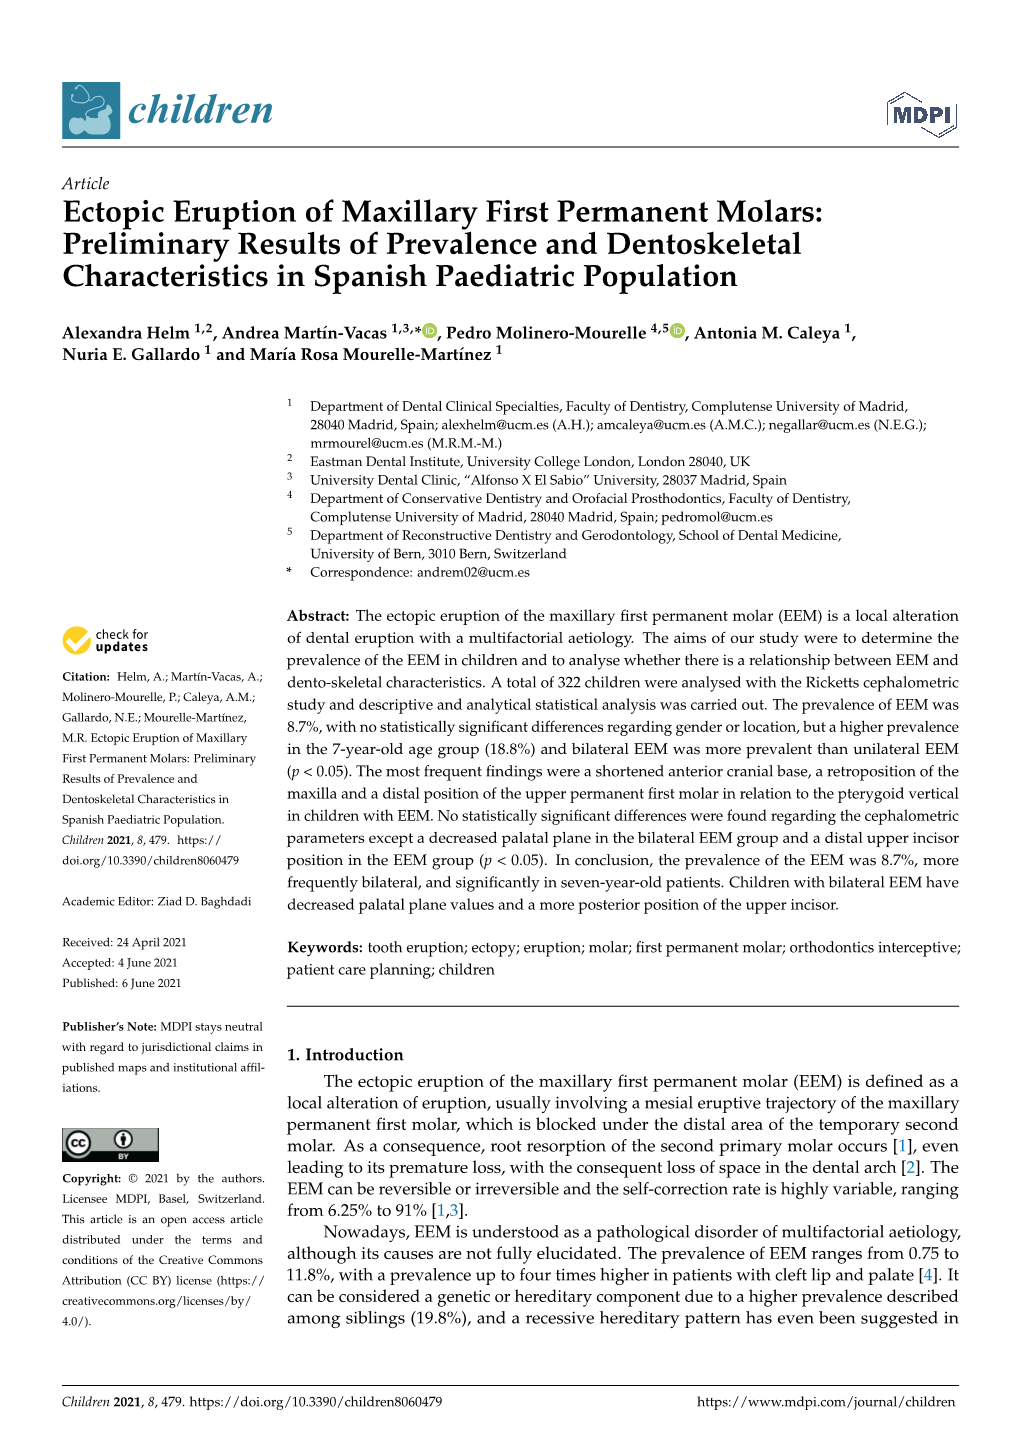 Ectopic Eruption of Maxillary First Permanent Molars: Preliminary Results of Prevalence and Dentoskeletal Characteristics in Spanish Paediatric Population